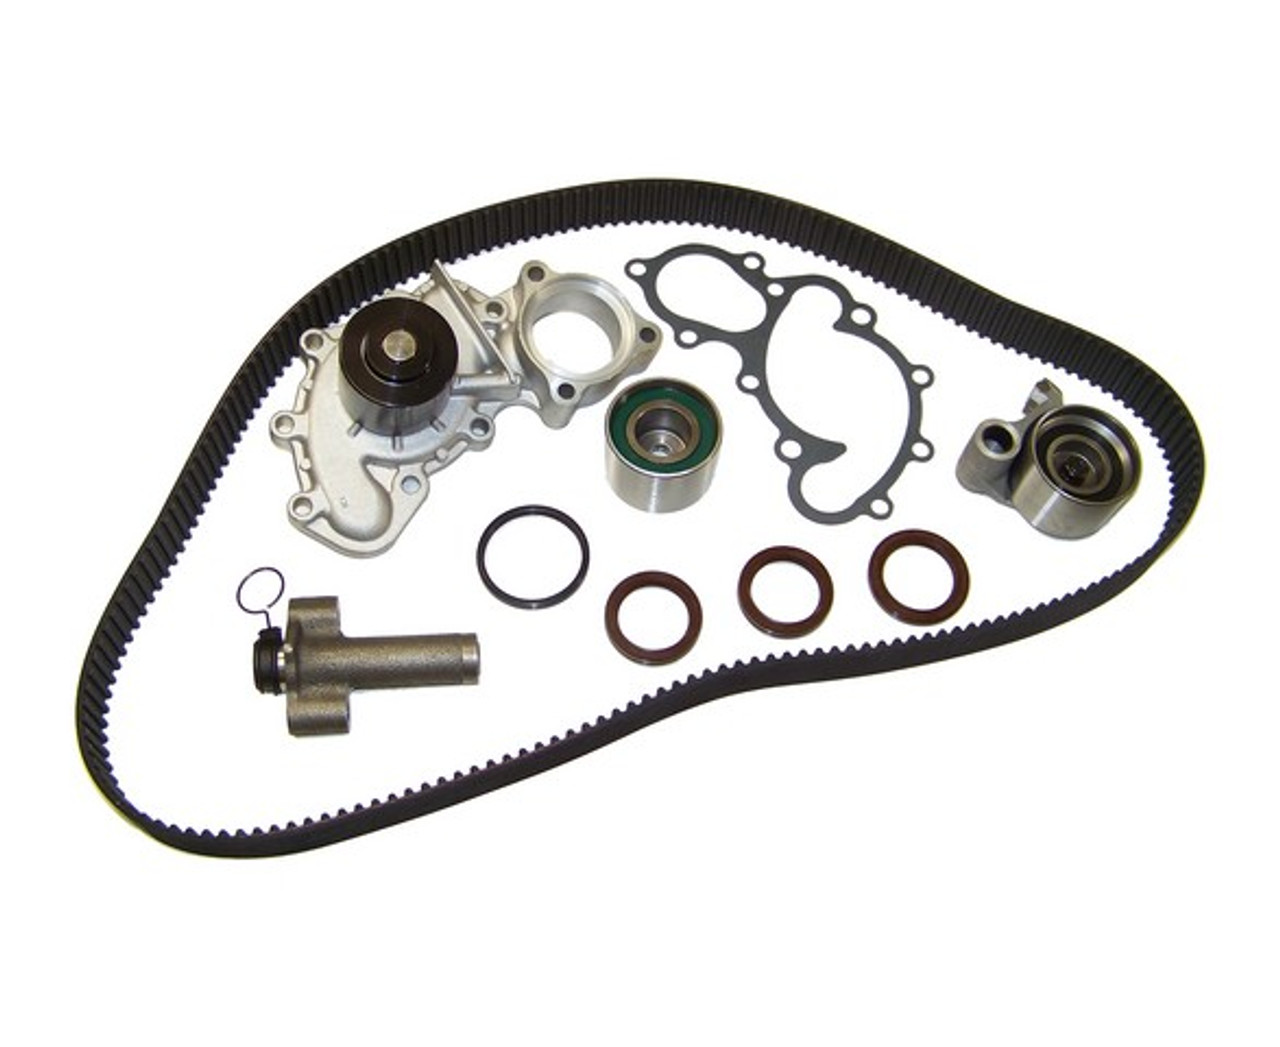 2000 Toyota Tundra 3.4L Timing Belt Kit with Water Pump TBK965AWP.E22